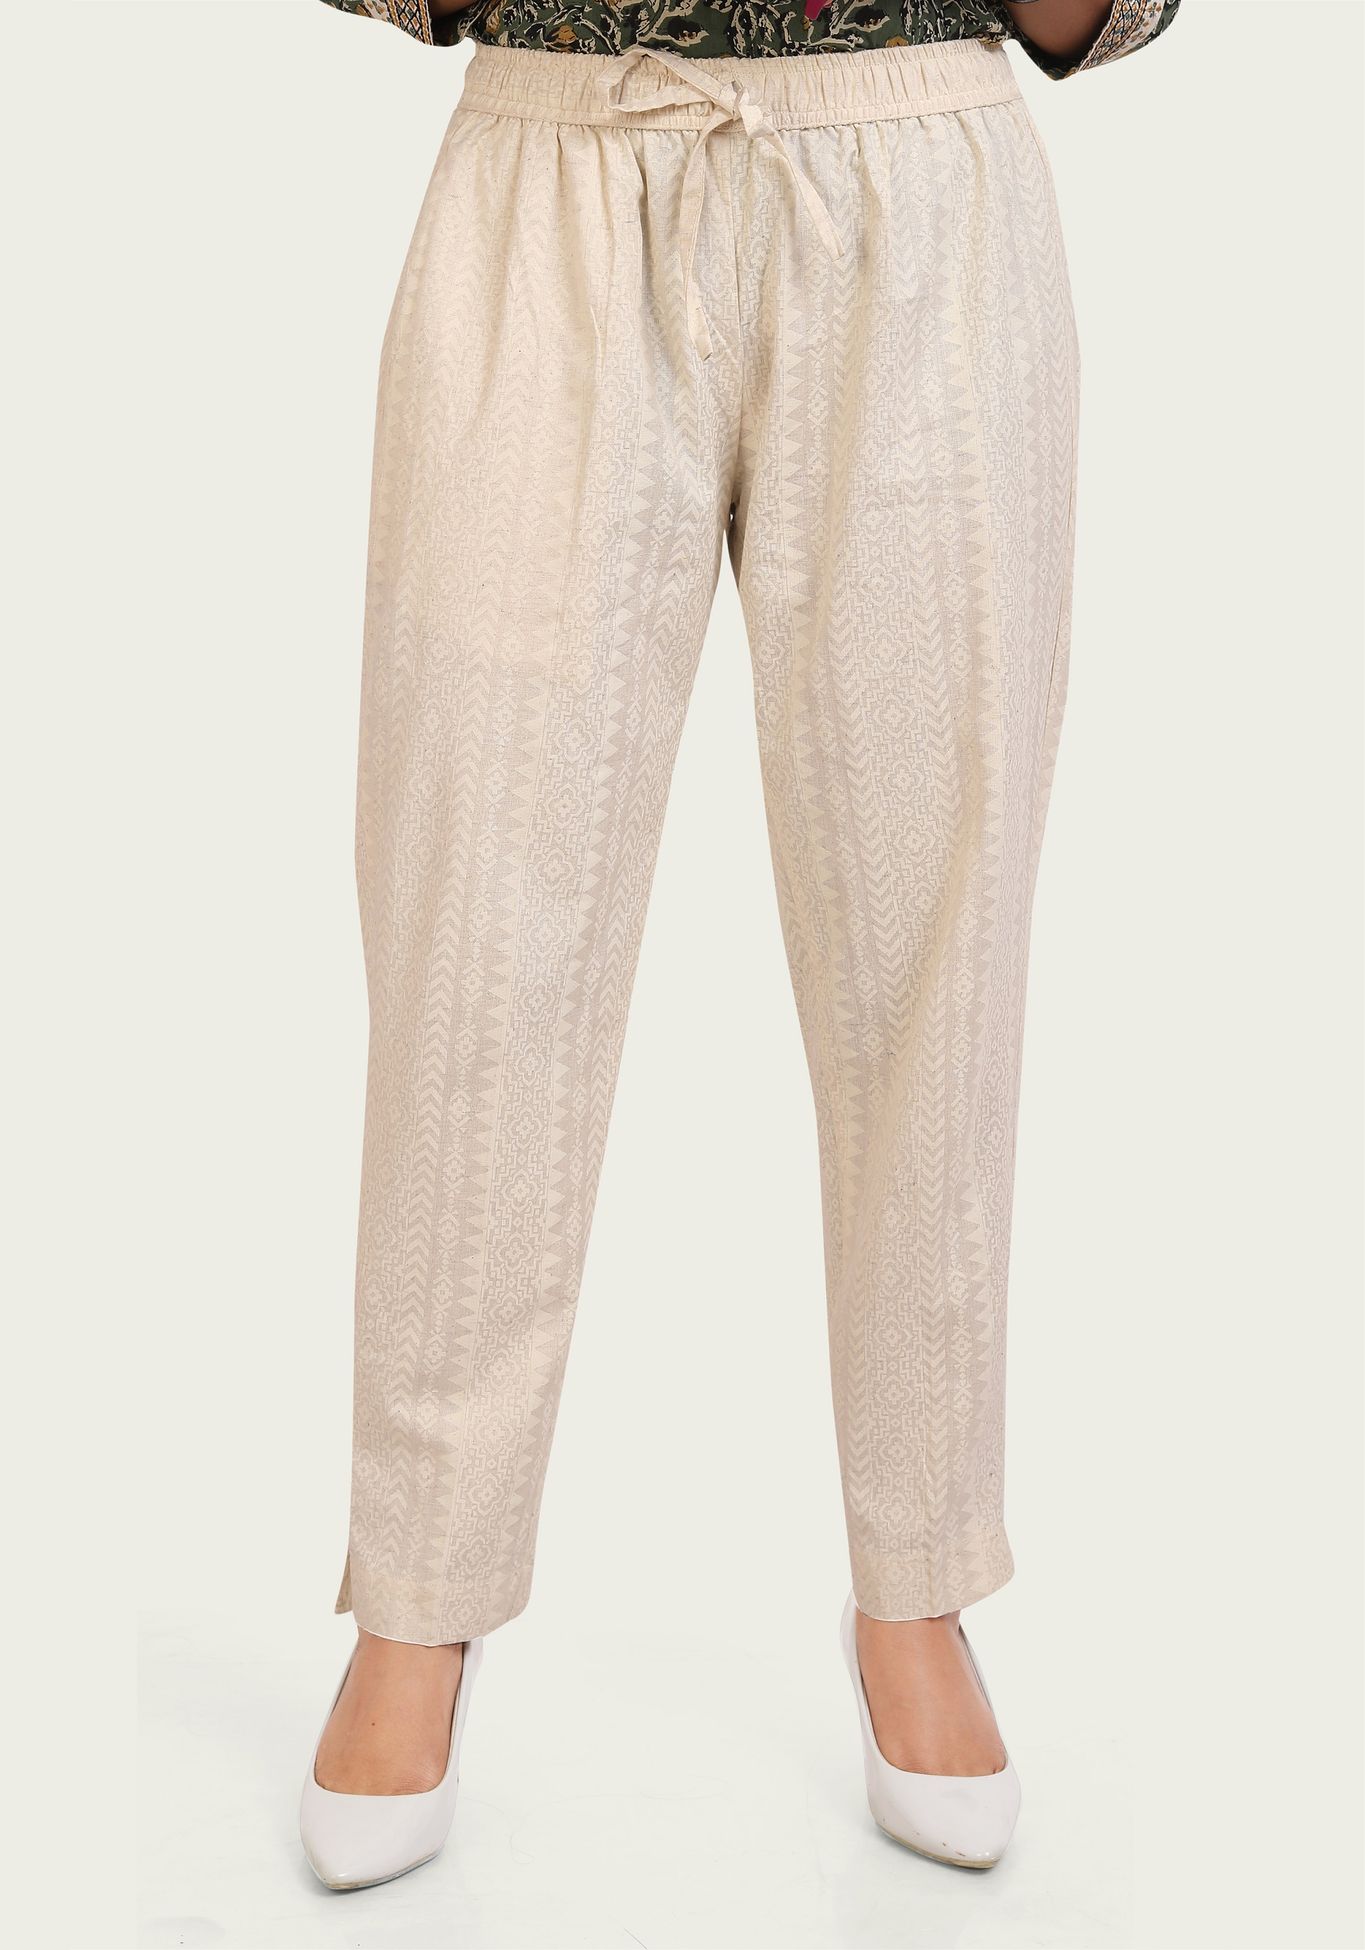 Buy ANCESTRY Off White Printed Trousers for Women's Online @ Tata CLiQ